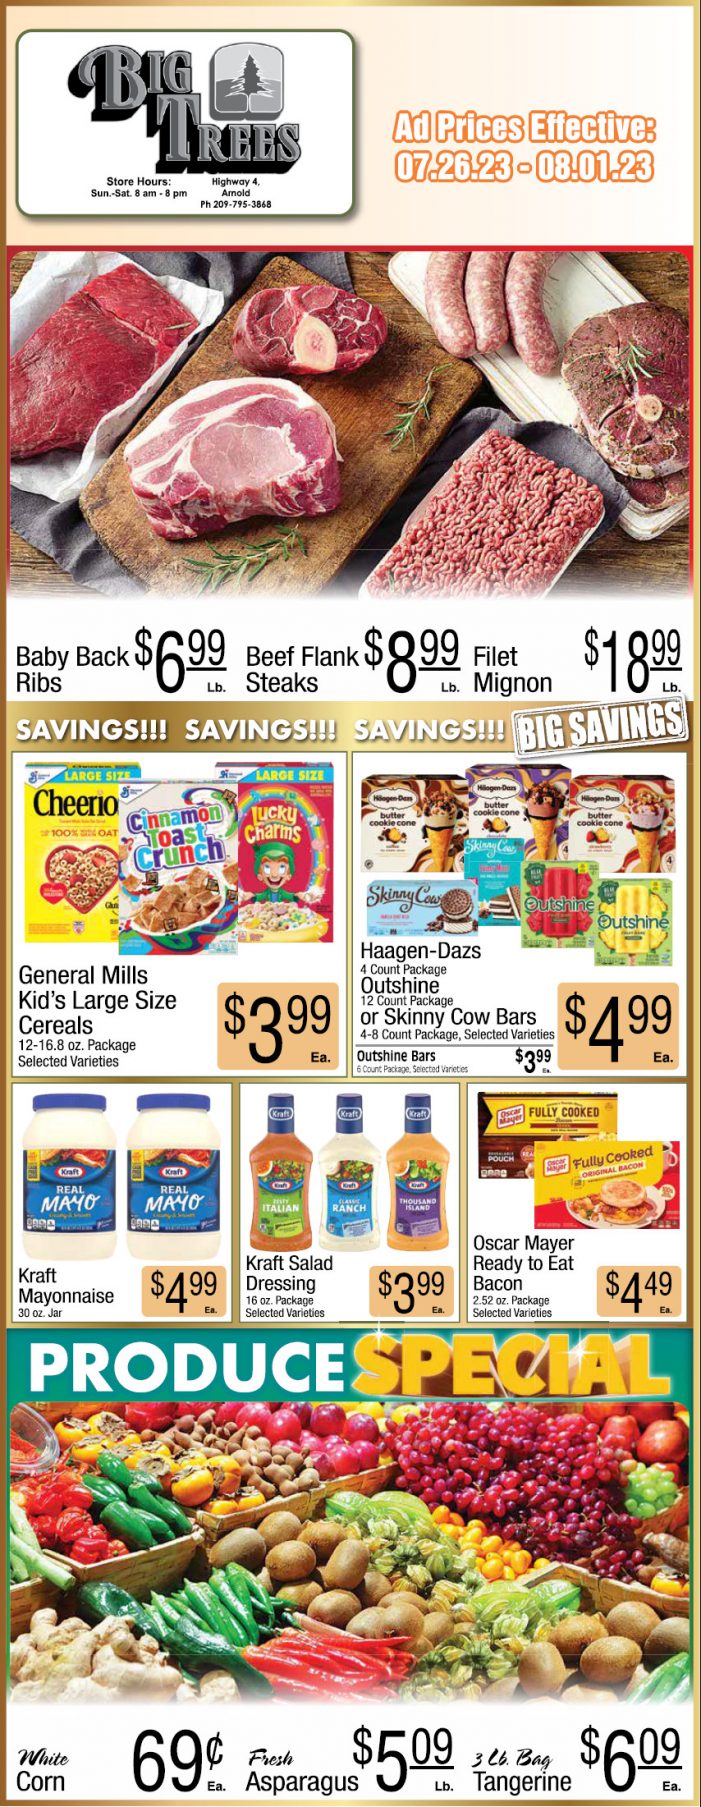 Big Trees Market Weekly Ad, Grocery, Produce, Meat & Deli Specials July 26 ~ Aug1st!  Shop Local & Save!